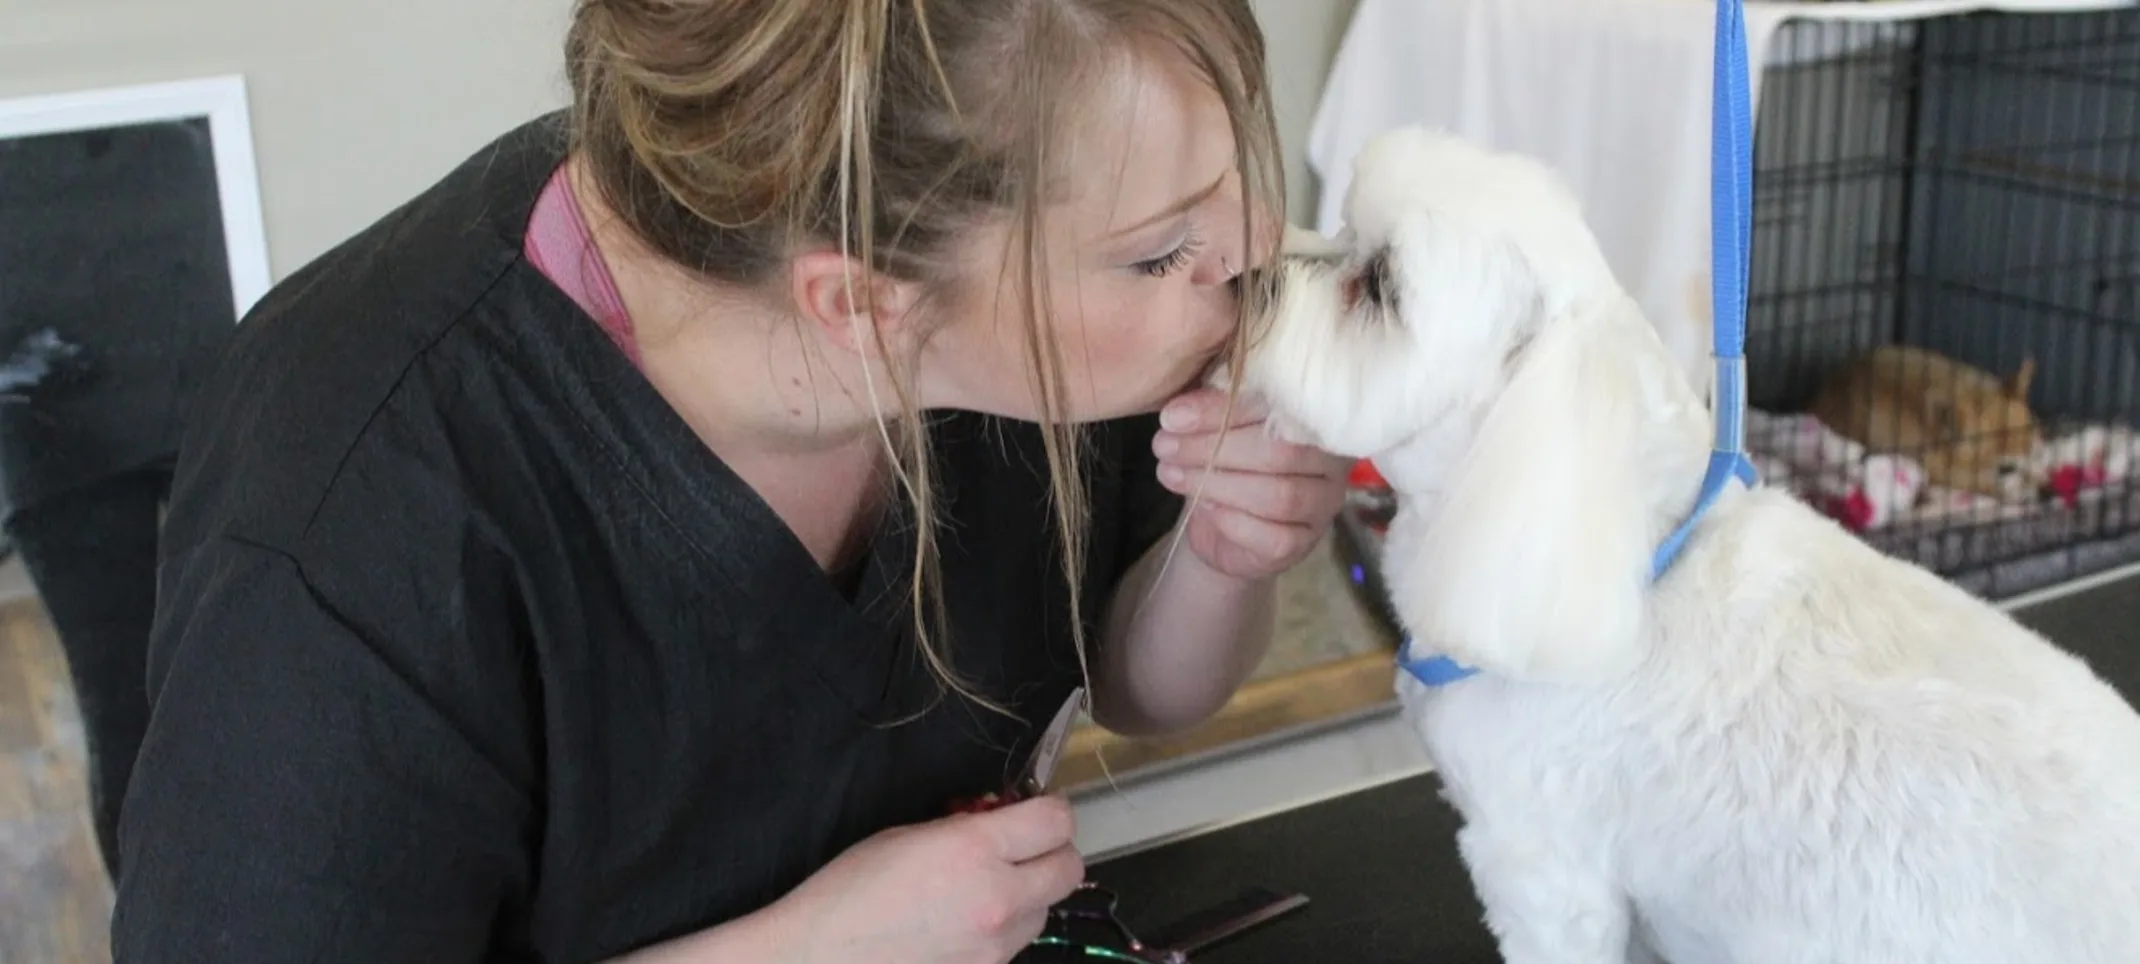 Groomer and dog sharing a nose kiss